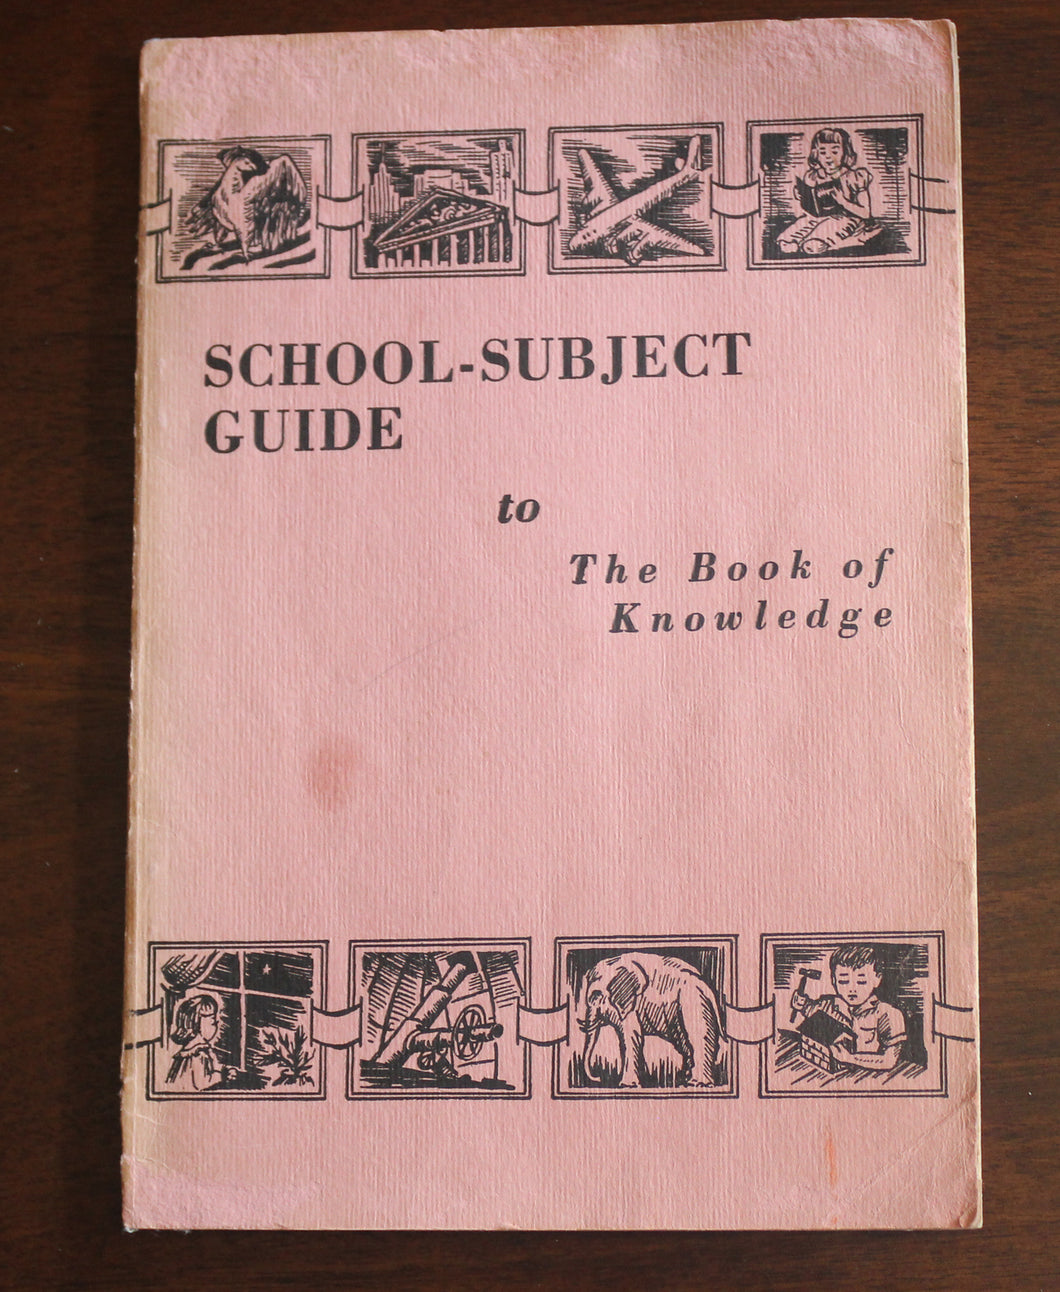 Vintage Library Homeschool Education Reference Guide The Book of Knowledge 1955